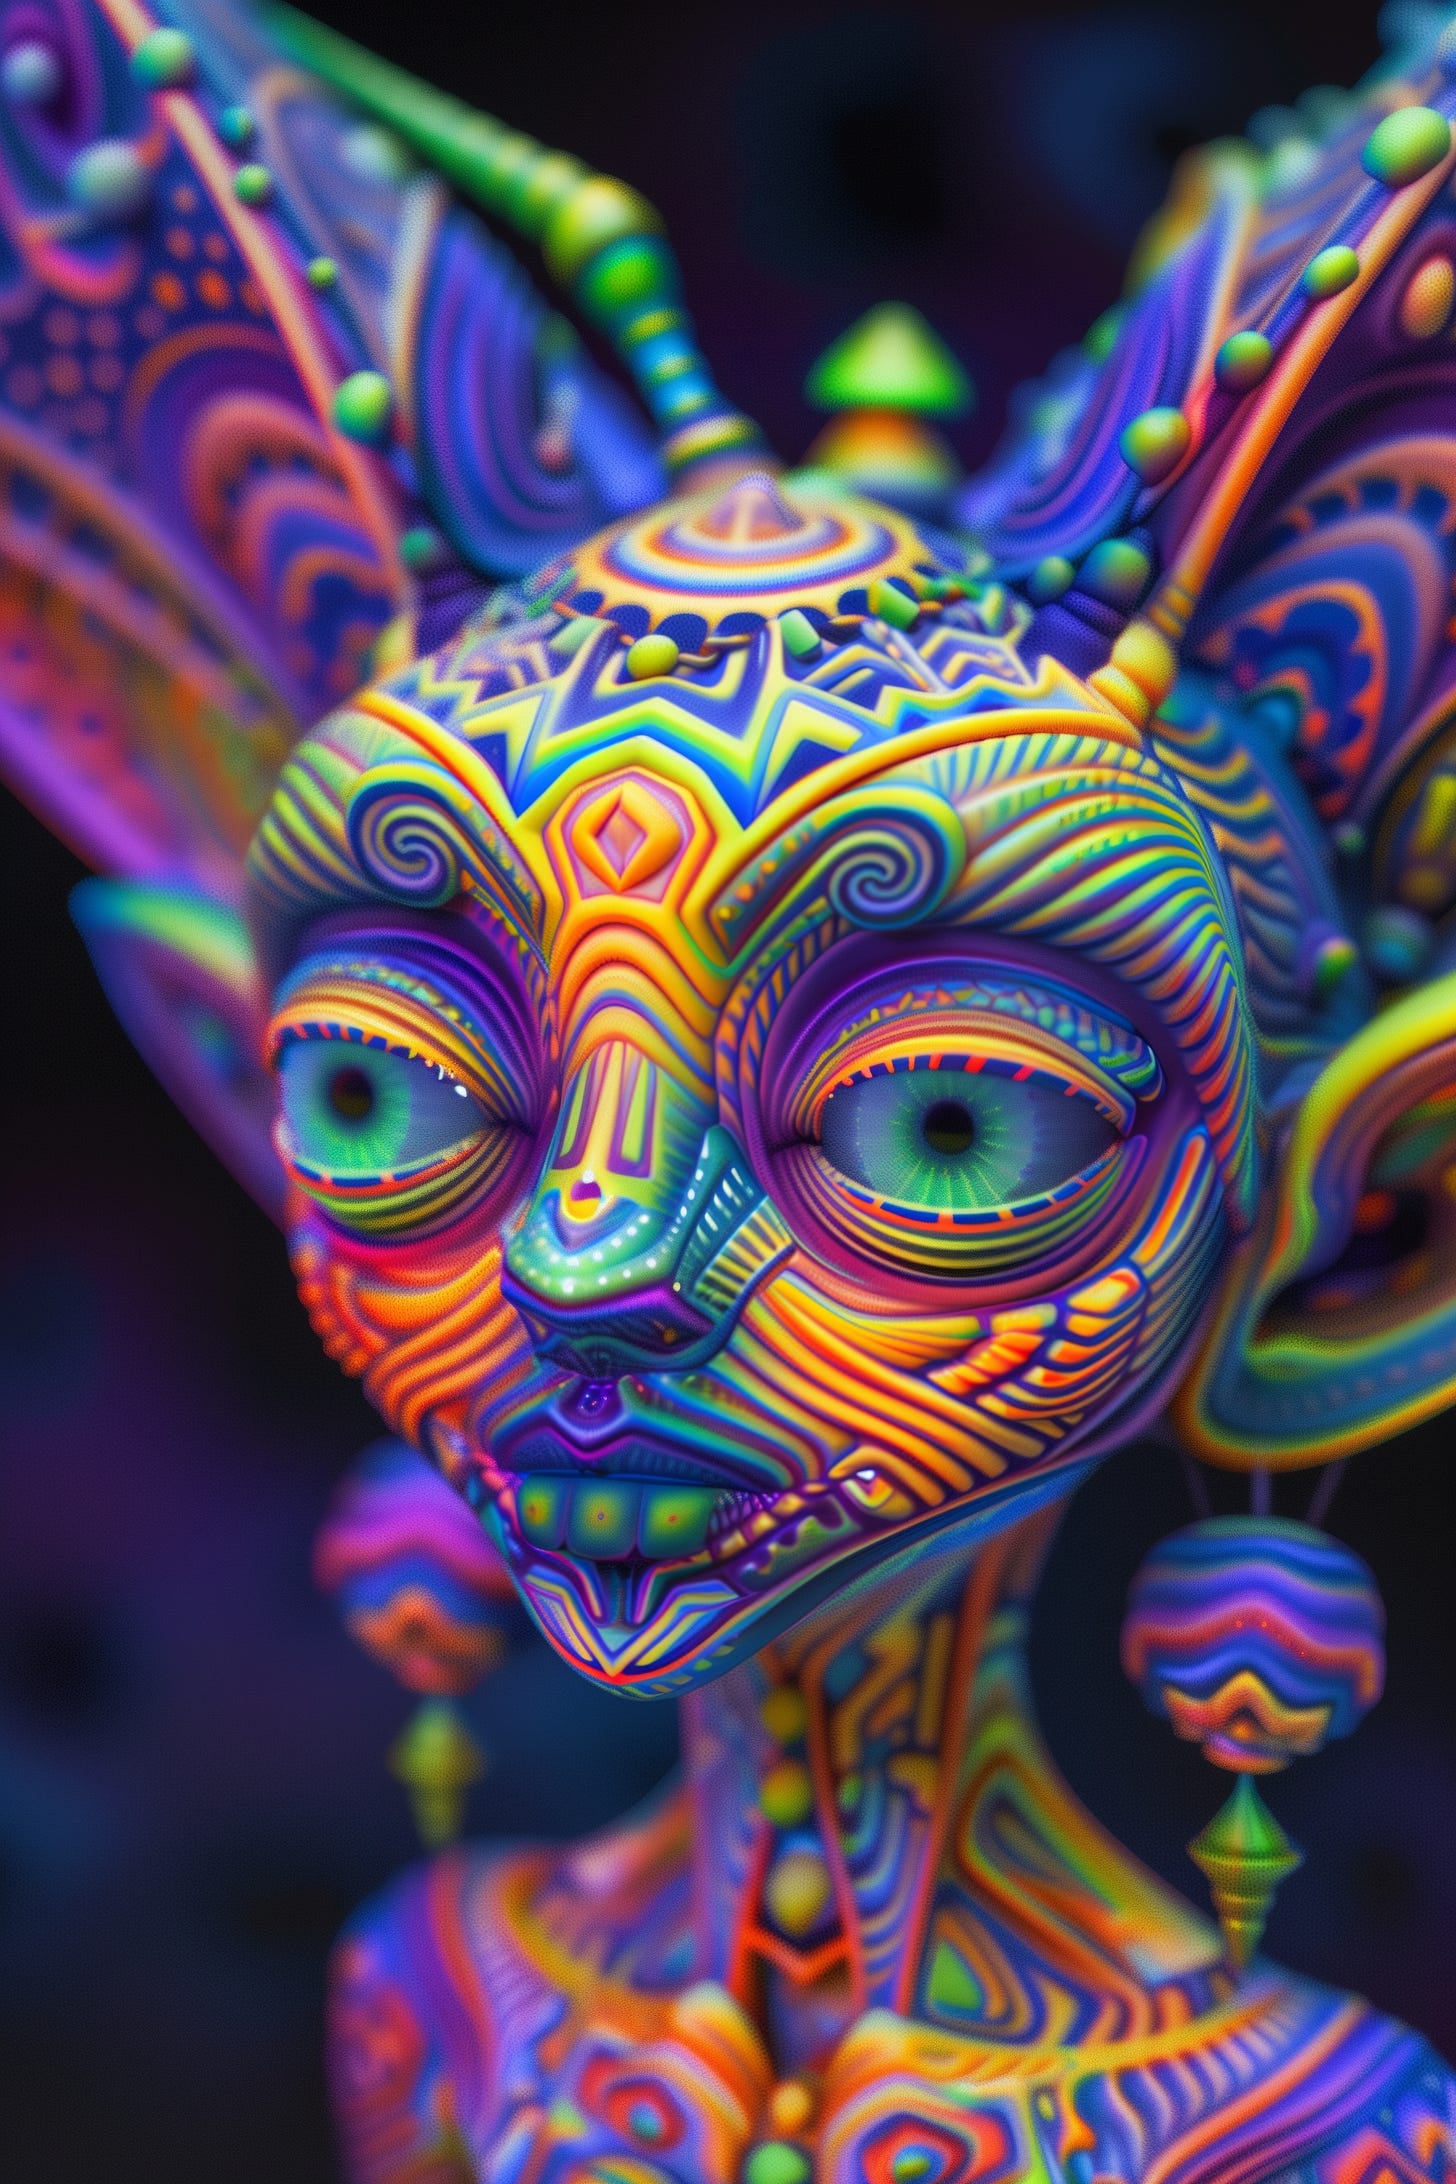 A colourful 3D psychedelic vision of a machine elf patterned with sacred geometry